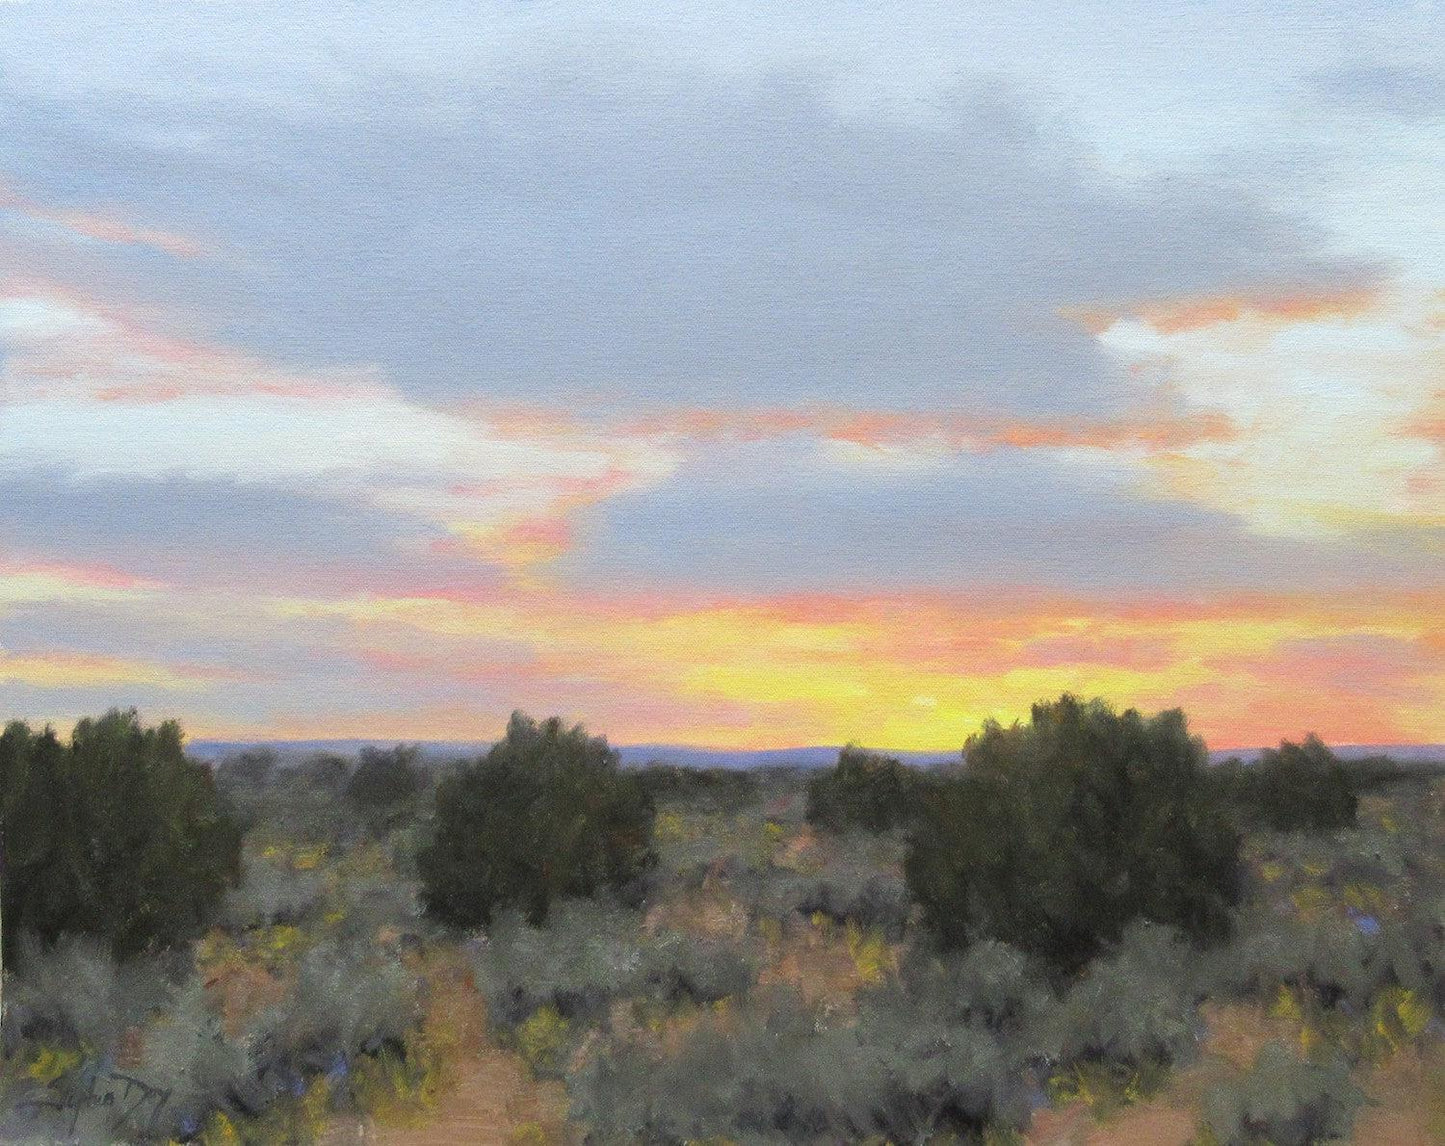 Clouds Breaking - Evening-painting-Stephen Day-Sorrel Sky Gallery